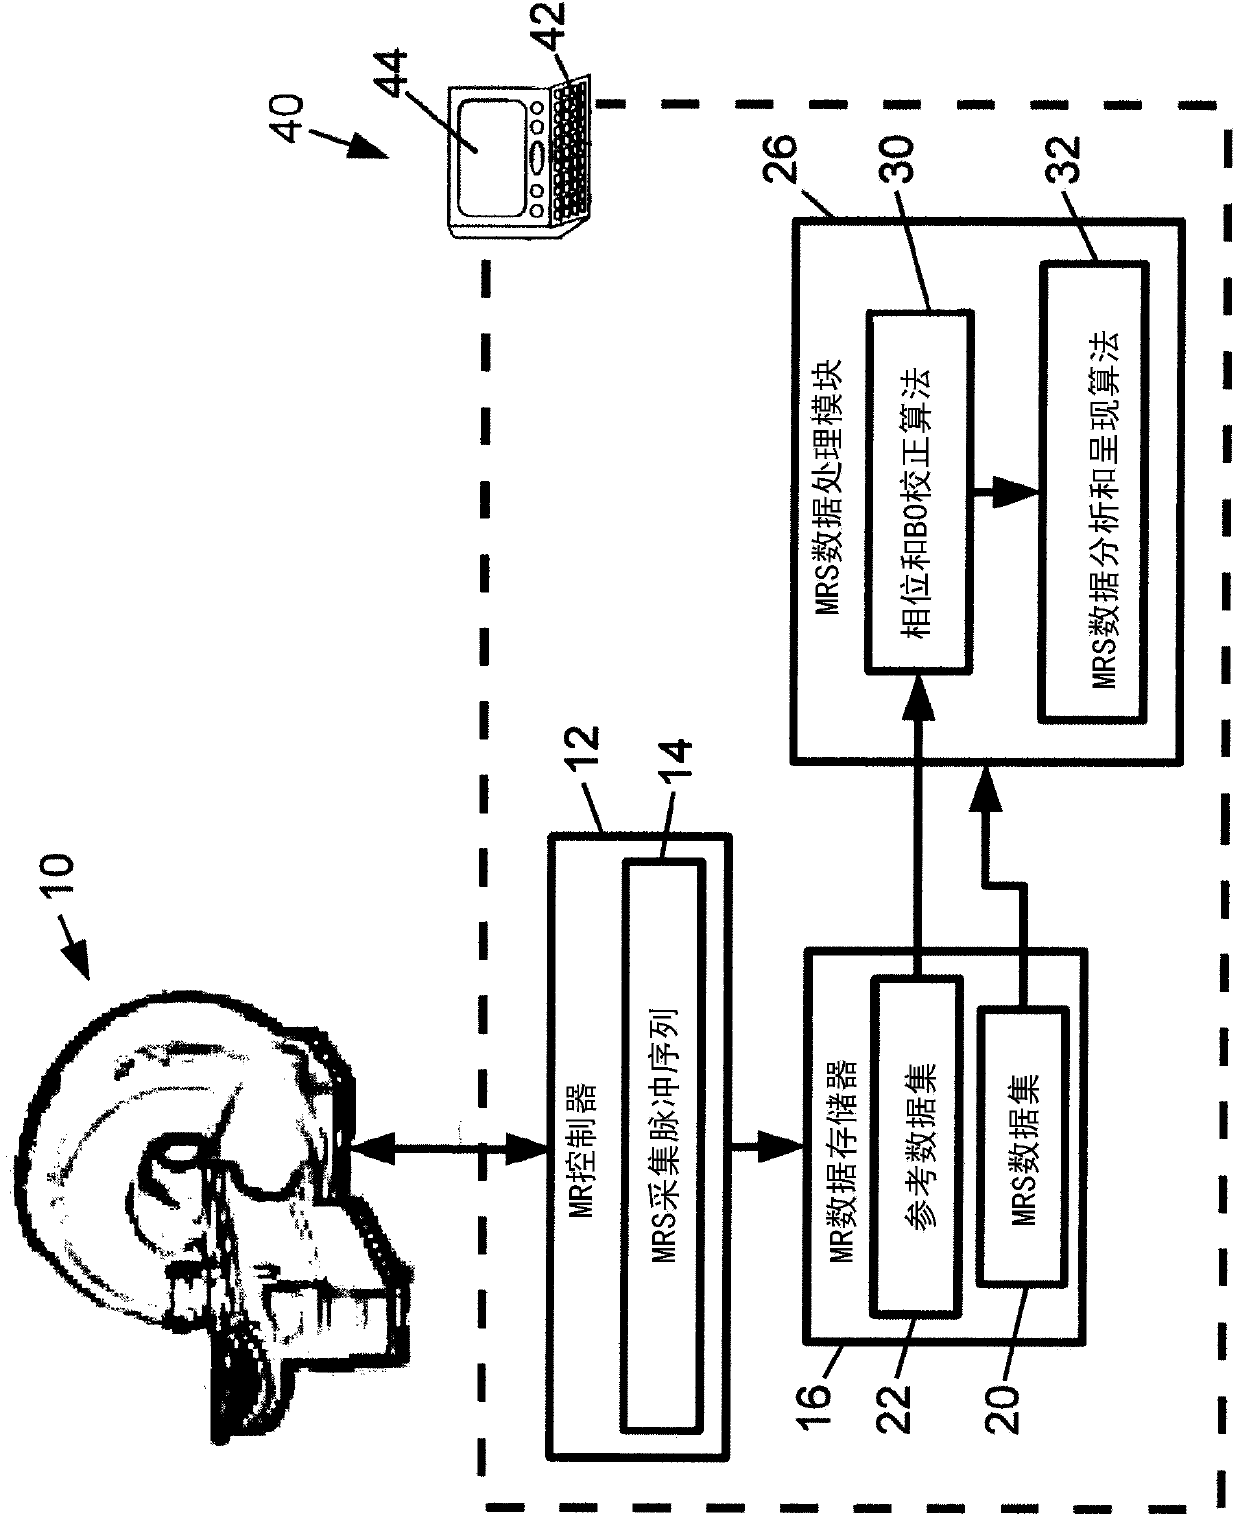 Magnetic resonance spectroscopy with automatic phase and b0 correction using interleaved water reference scan